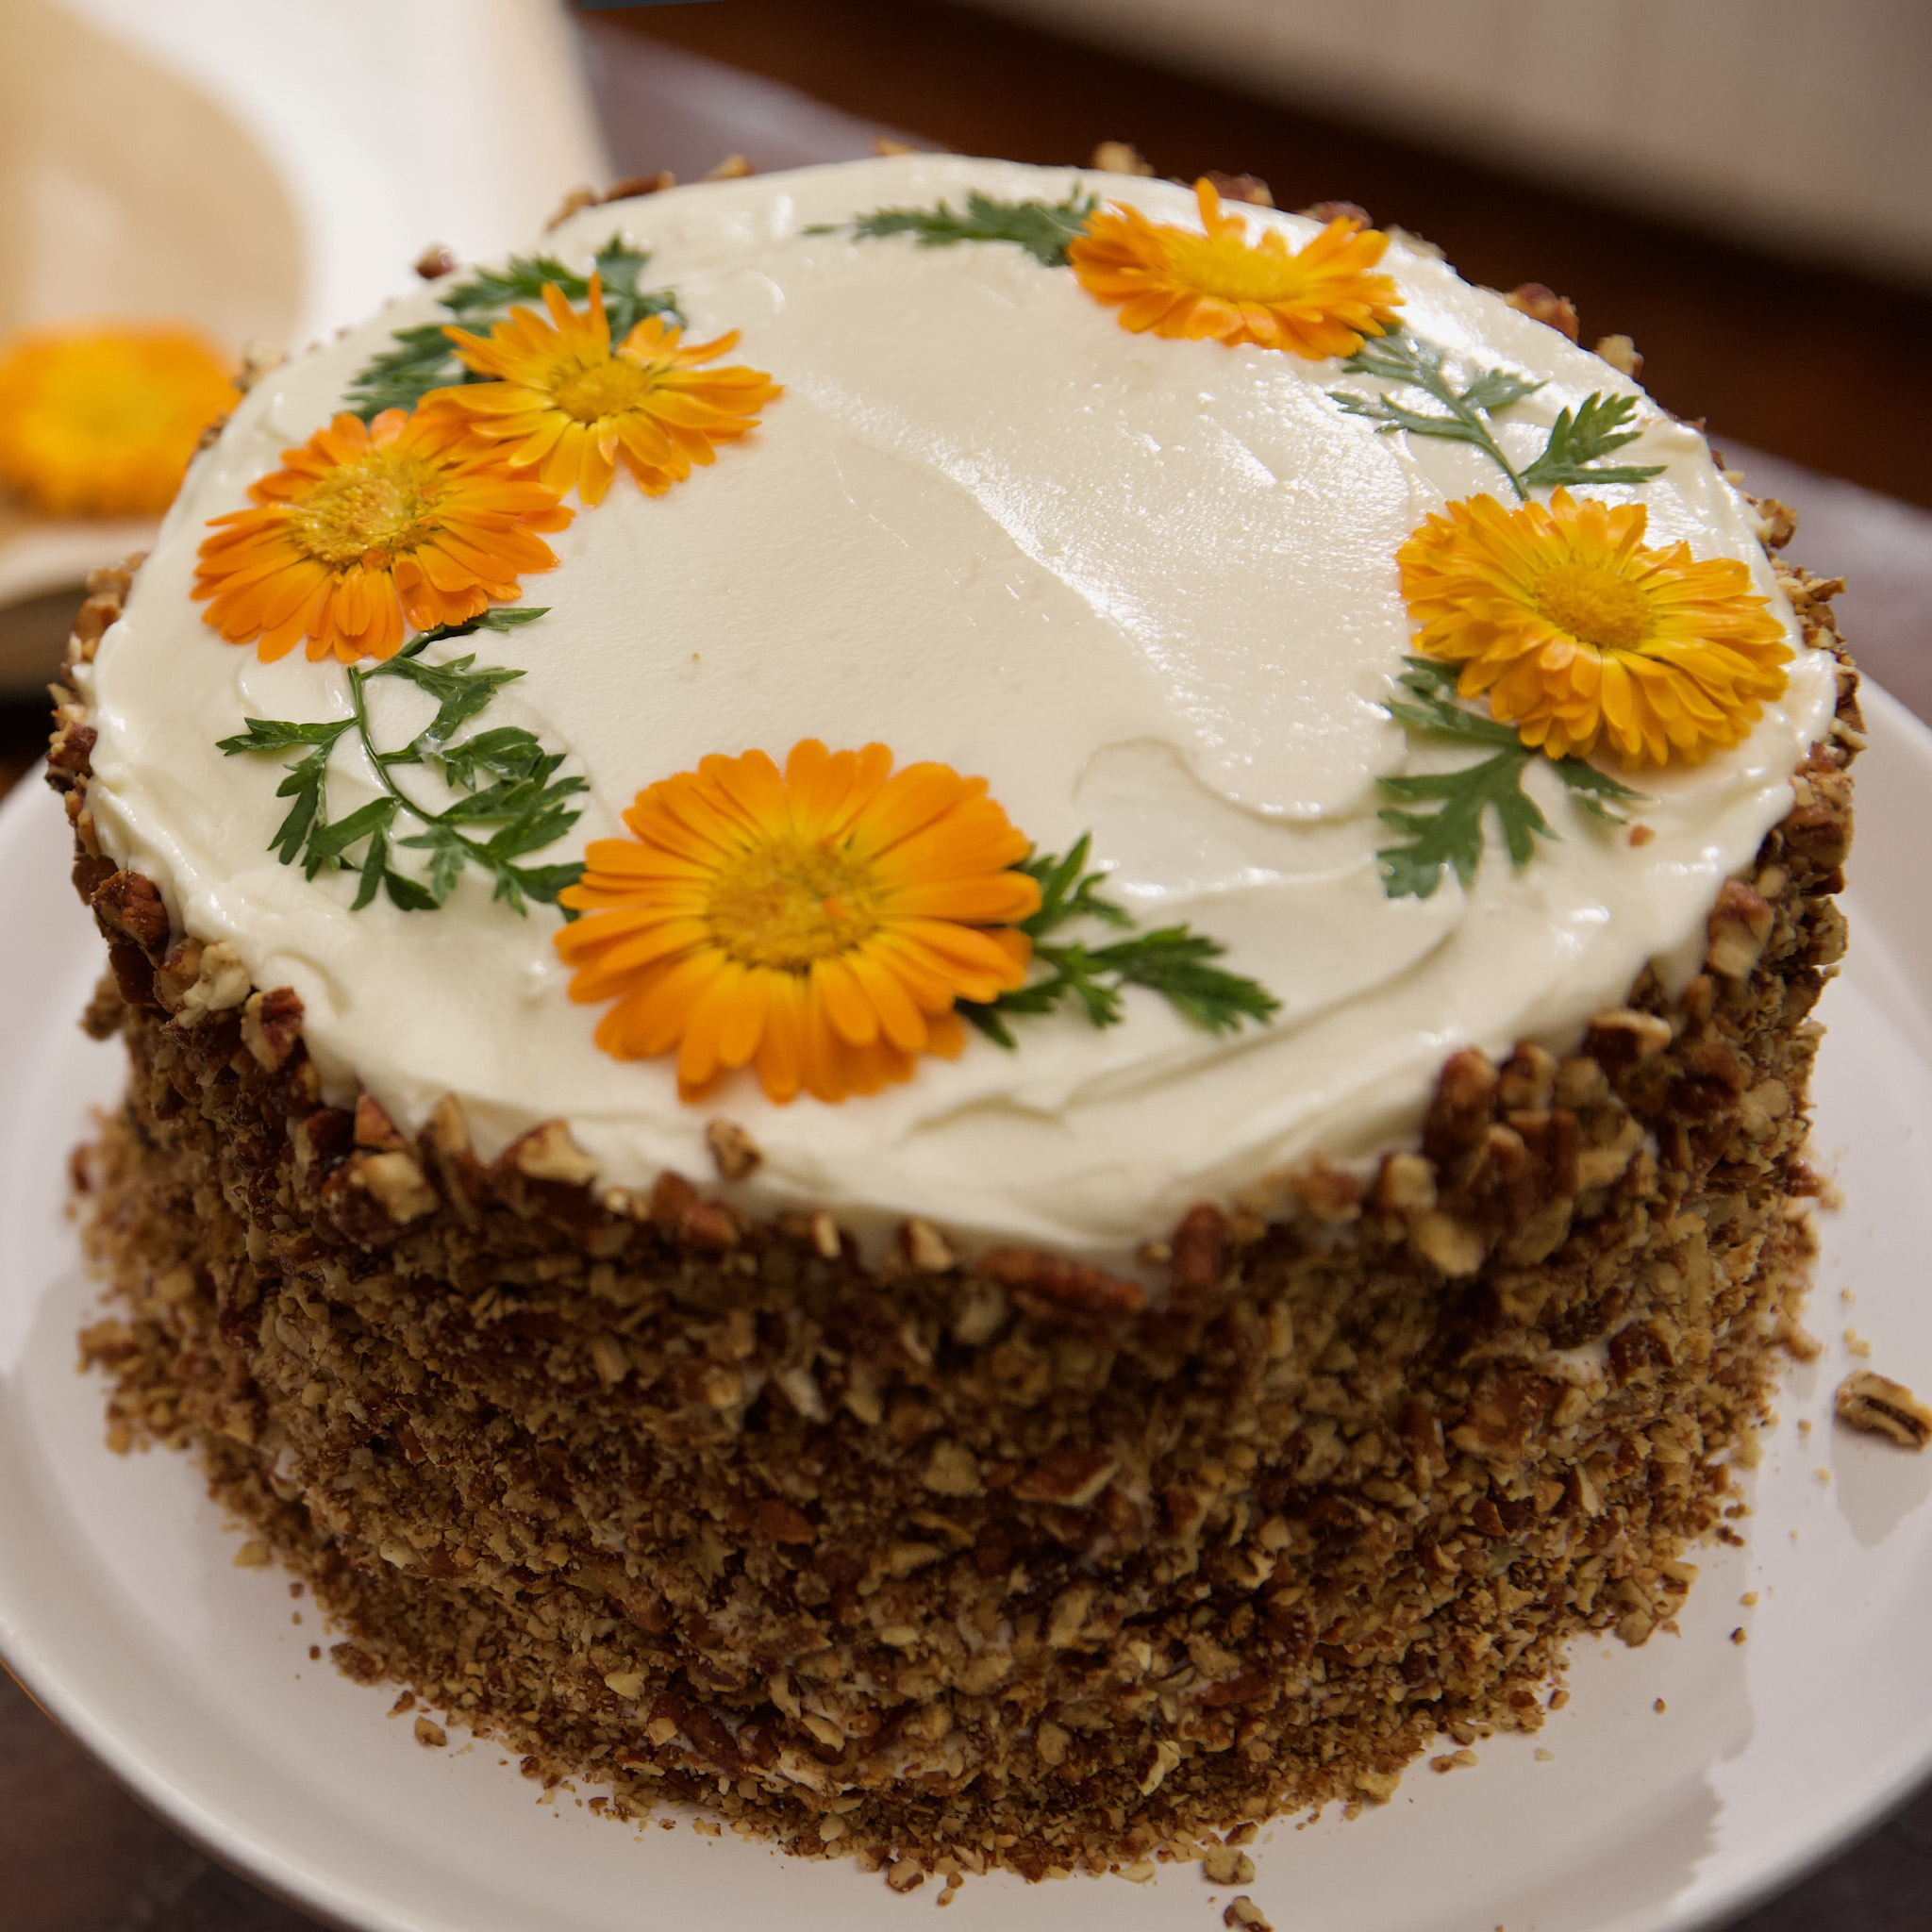 Elizabeth Poett's Four-Layer Carrot Cake with Maple Cream Cheese Frosting